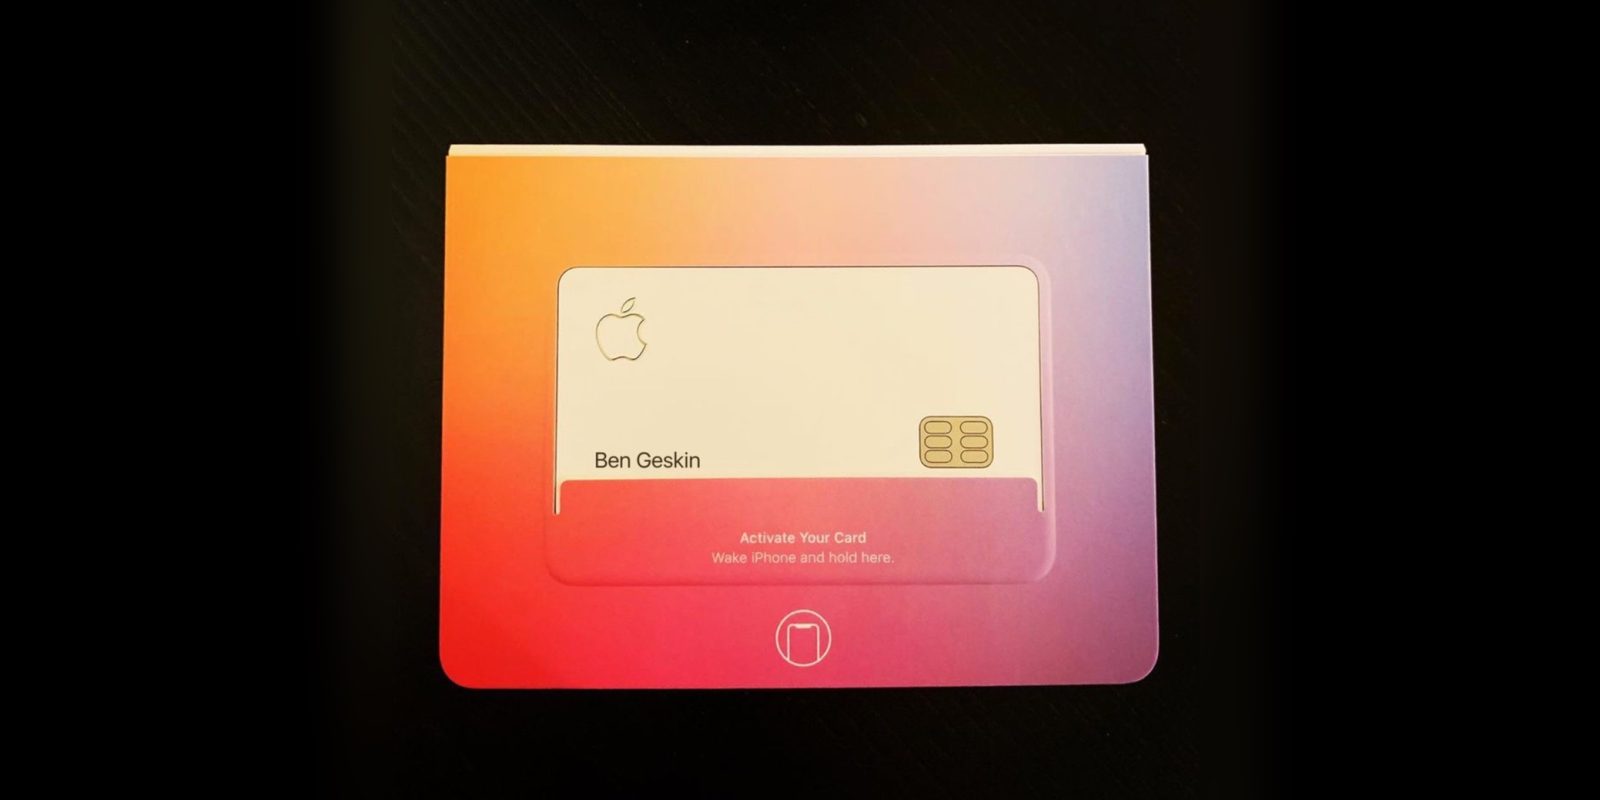 https://9to5mac.com/wp-content/uploads/sites/6/2019/05/apple-card-packaging.jpg?quality=82&strip=all&w=1600